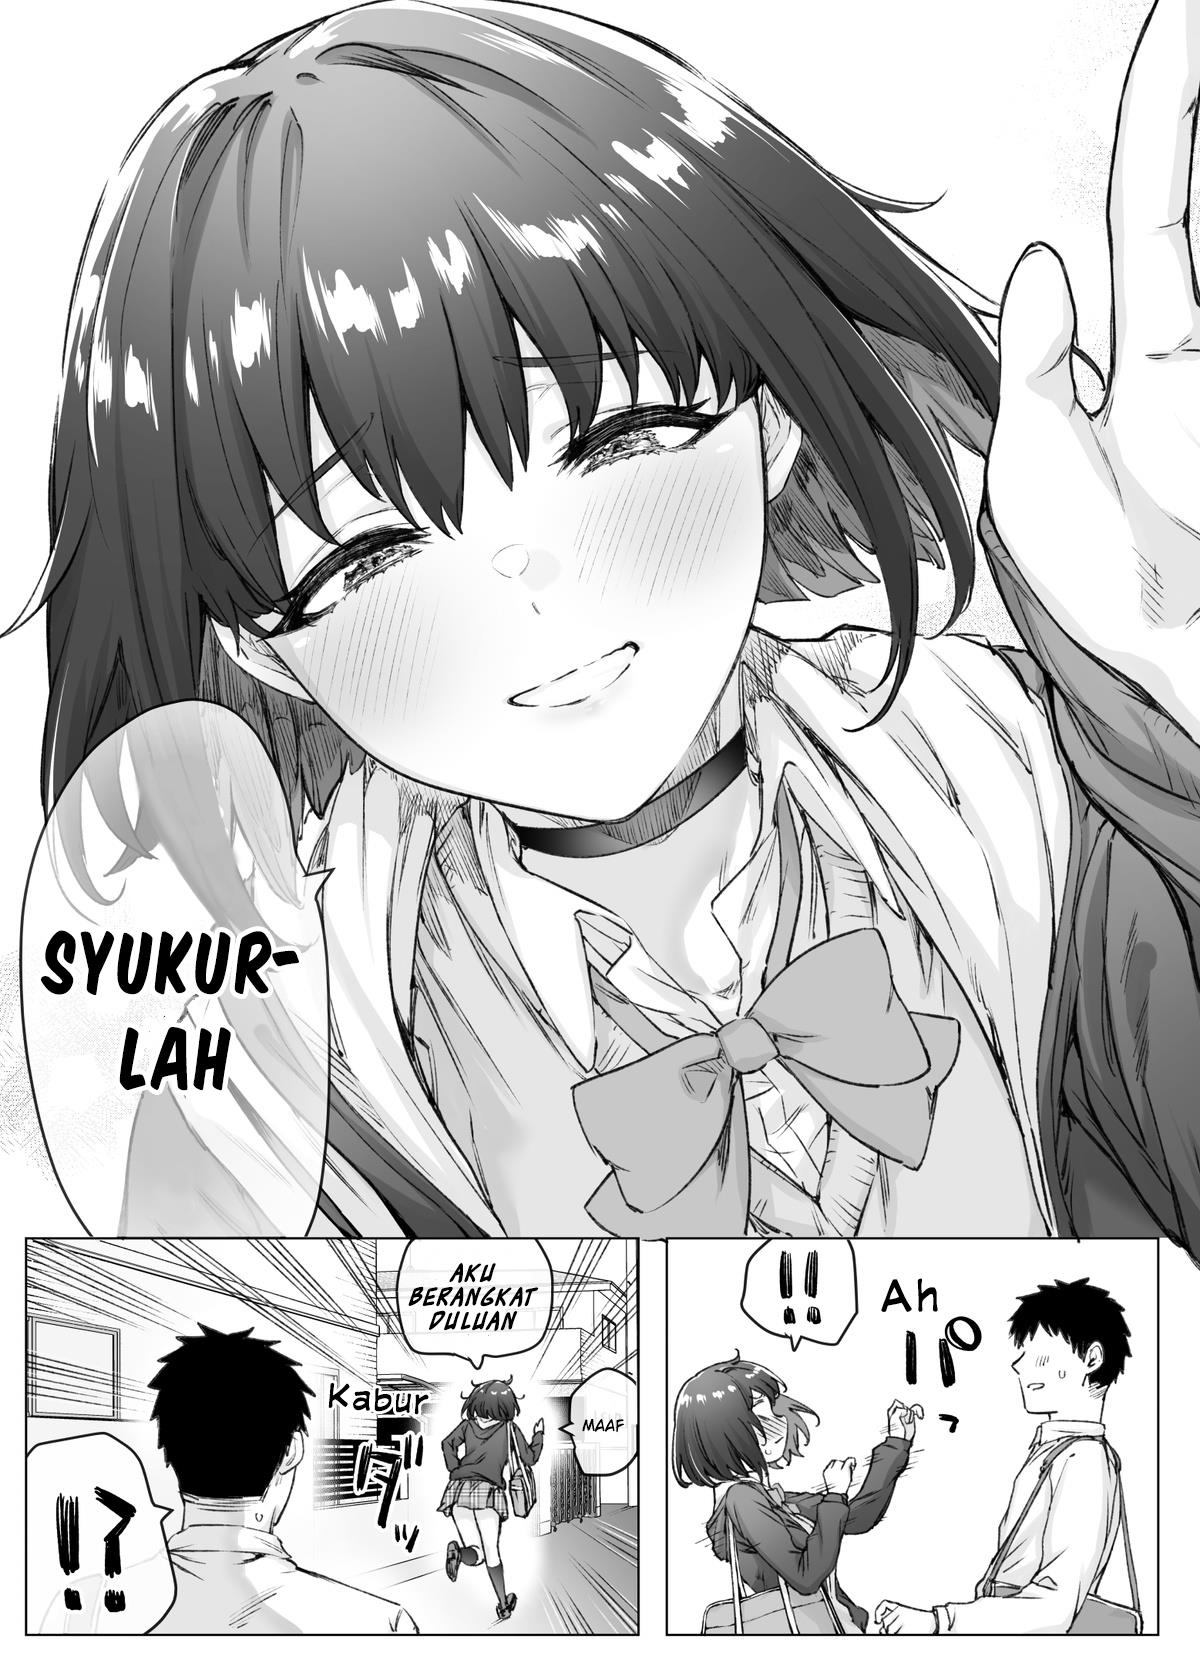 The Tsuntsuntsuntsuntsuntsun tsuntsuntsuntsuntsundere Girl Getting Less and Less Tsun Day by Day Chapter 24